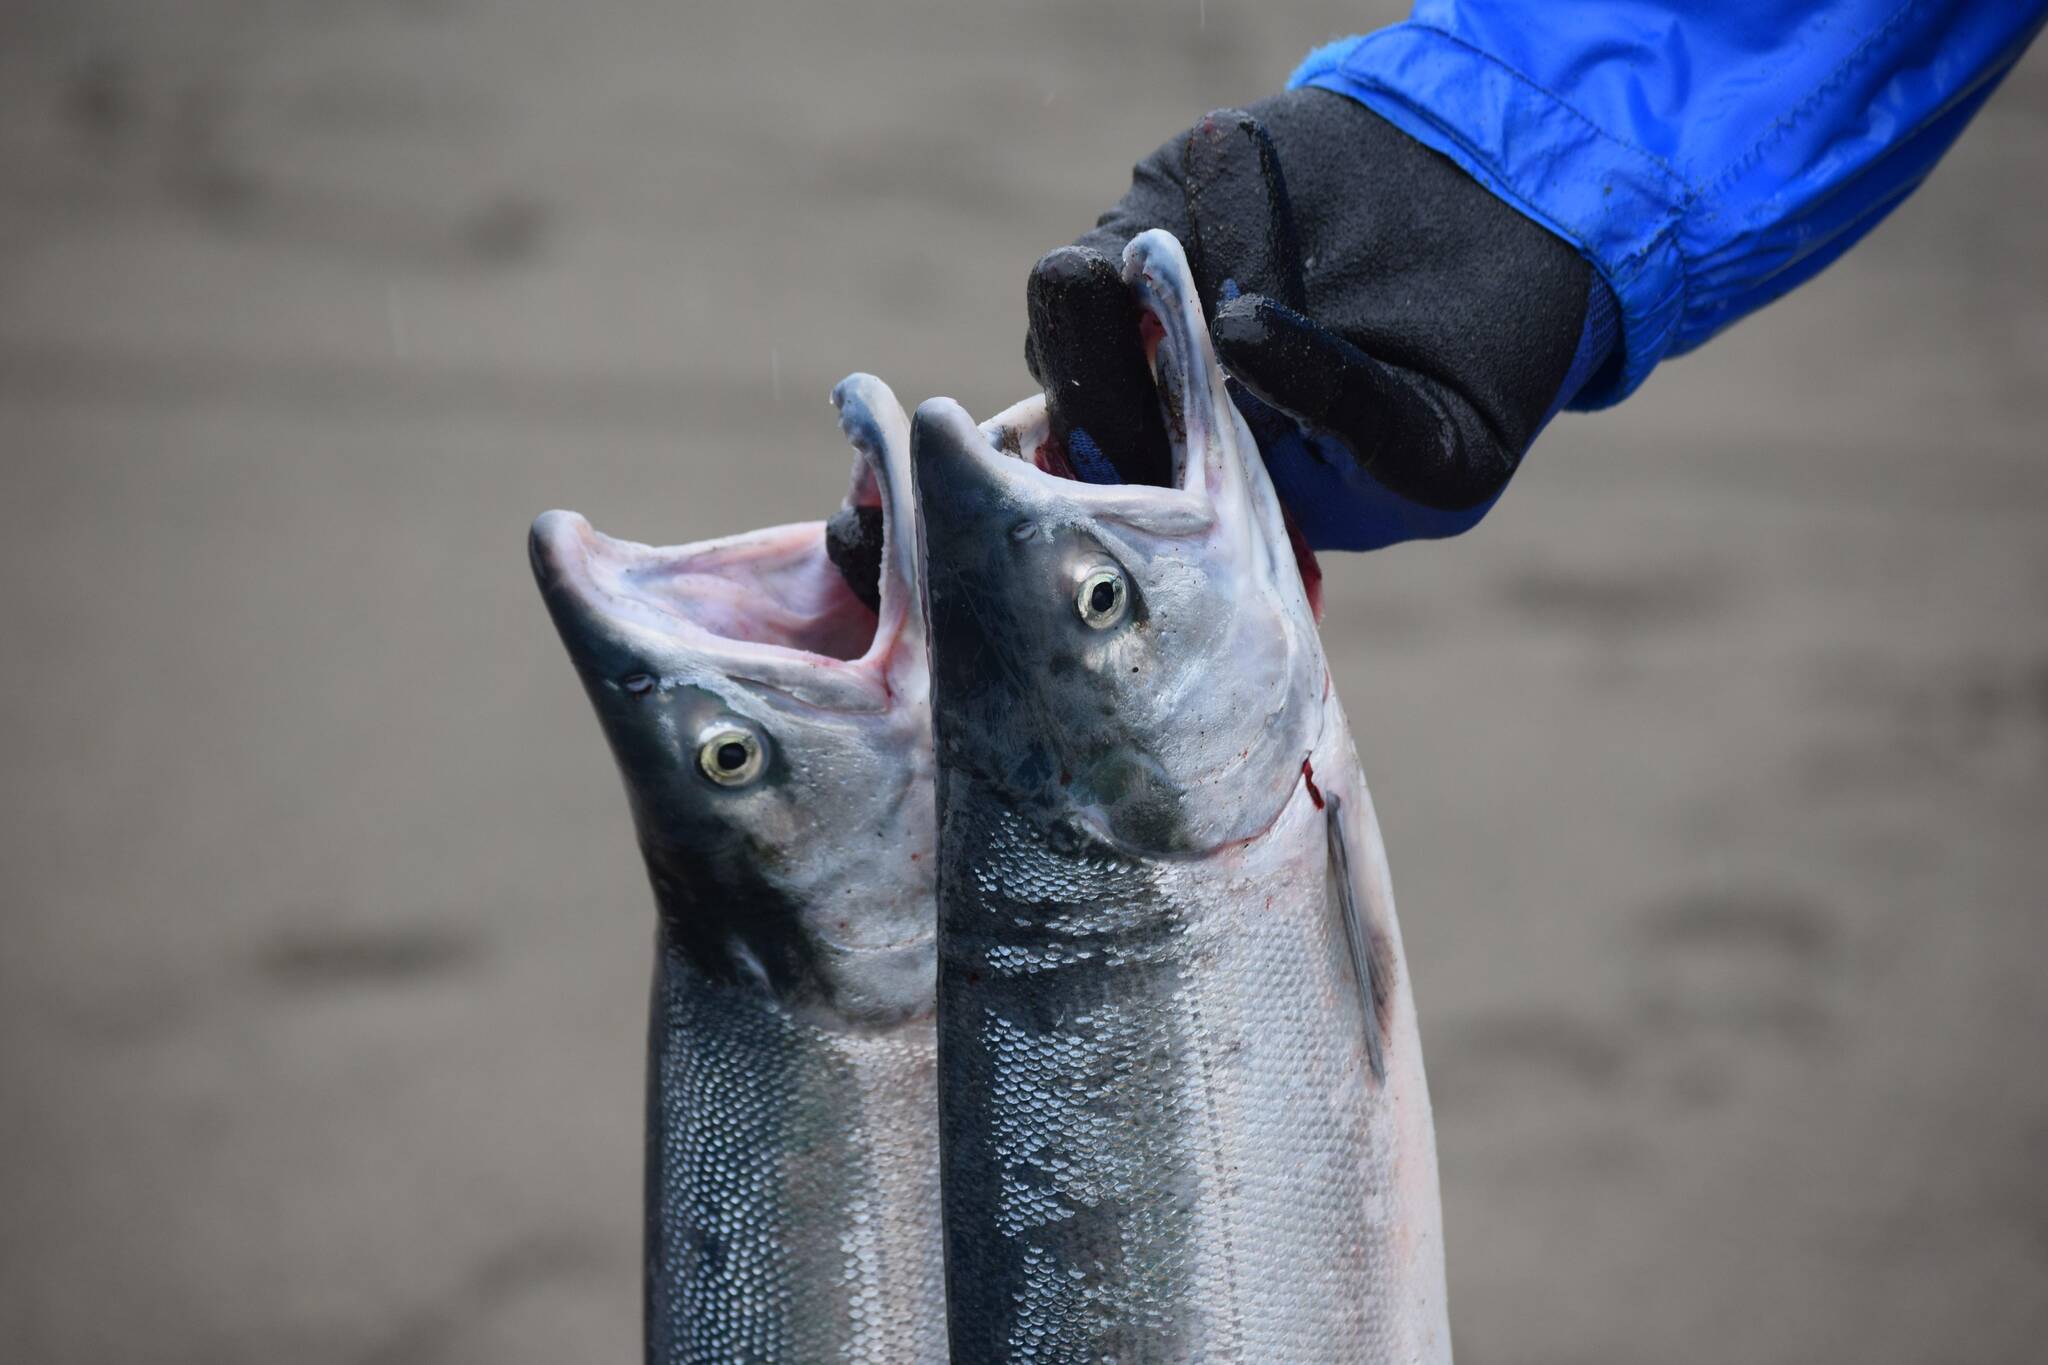 Raymond Bradbury preserves his salmon while dipnetting in the mouth of the Kenai River on Saturday, July 10, 2021. (Camille Botello / Peninsula Clarion)